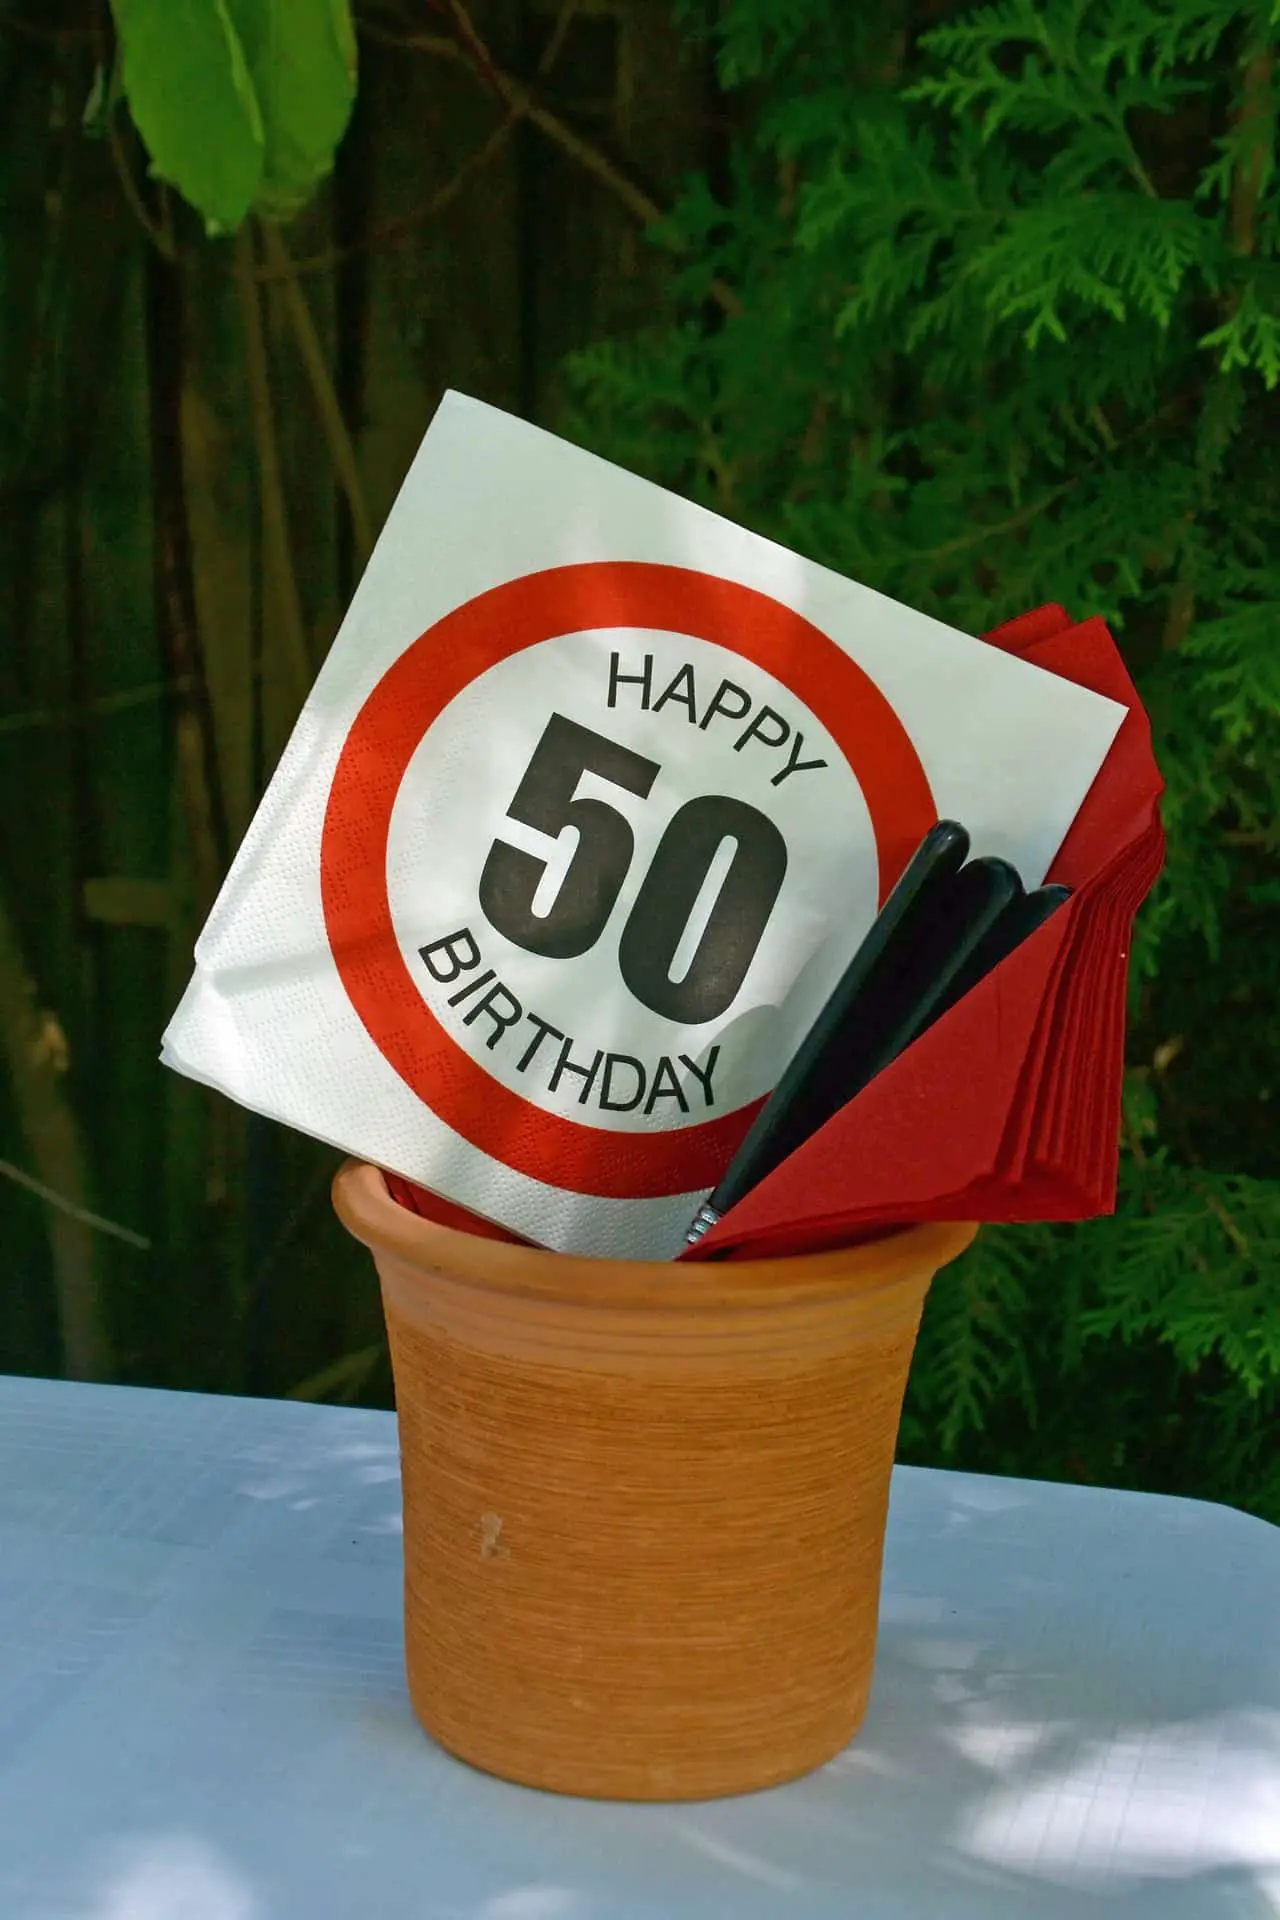 Fabulous 50th birthday party themes